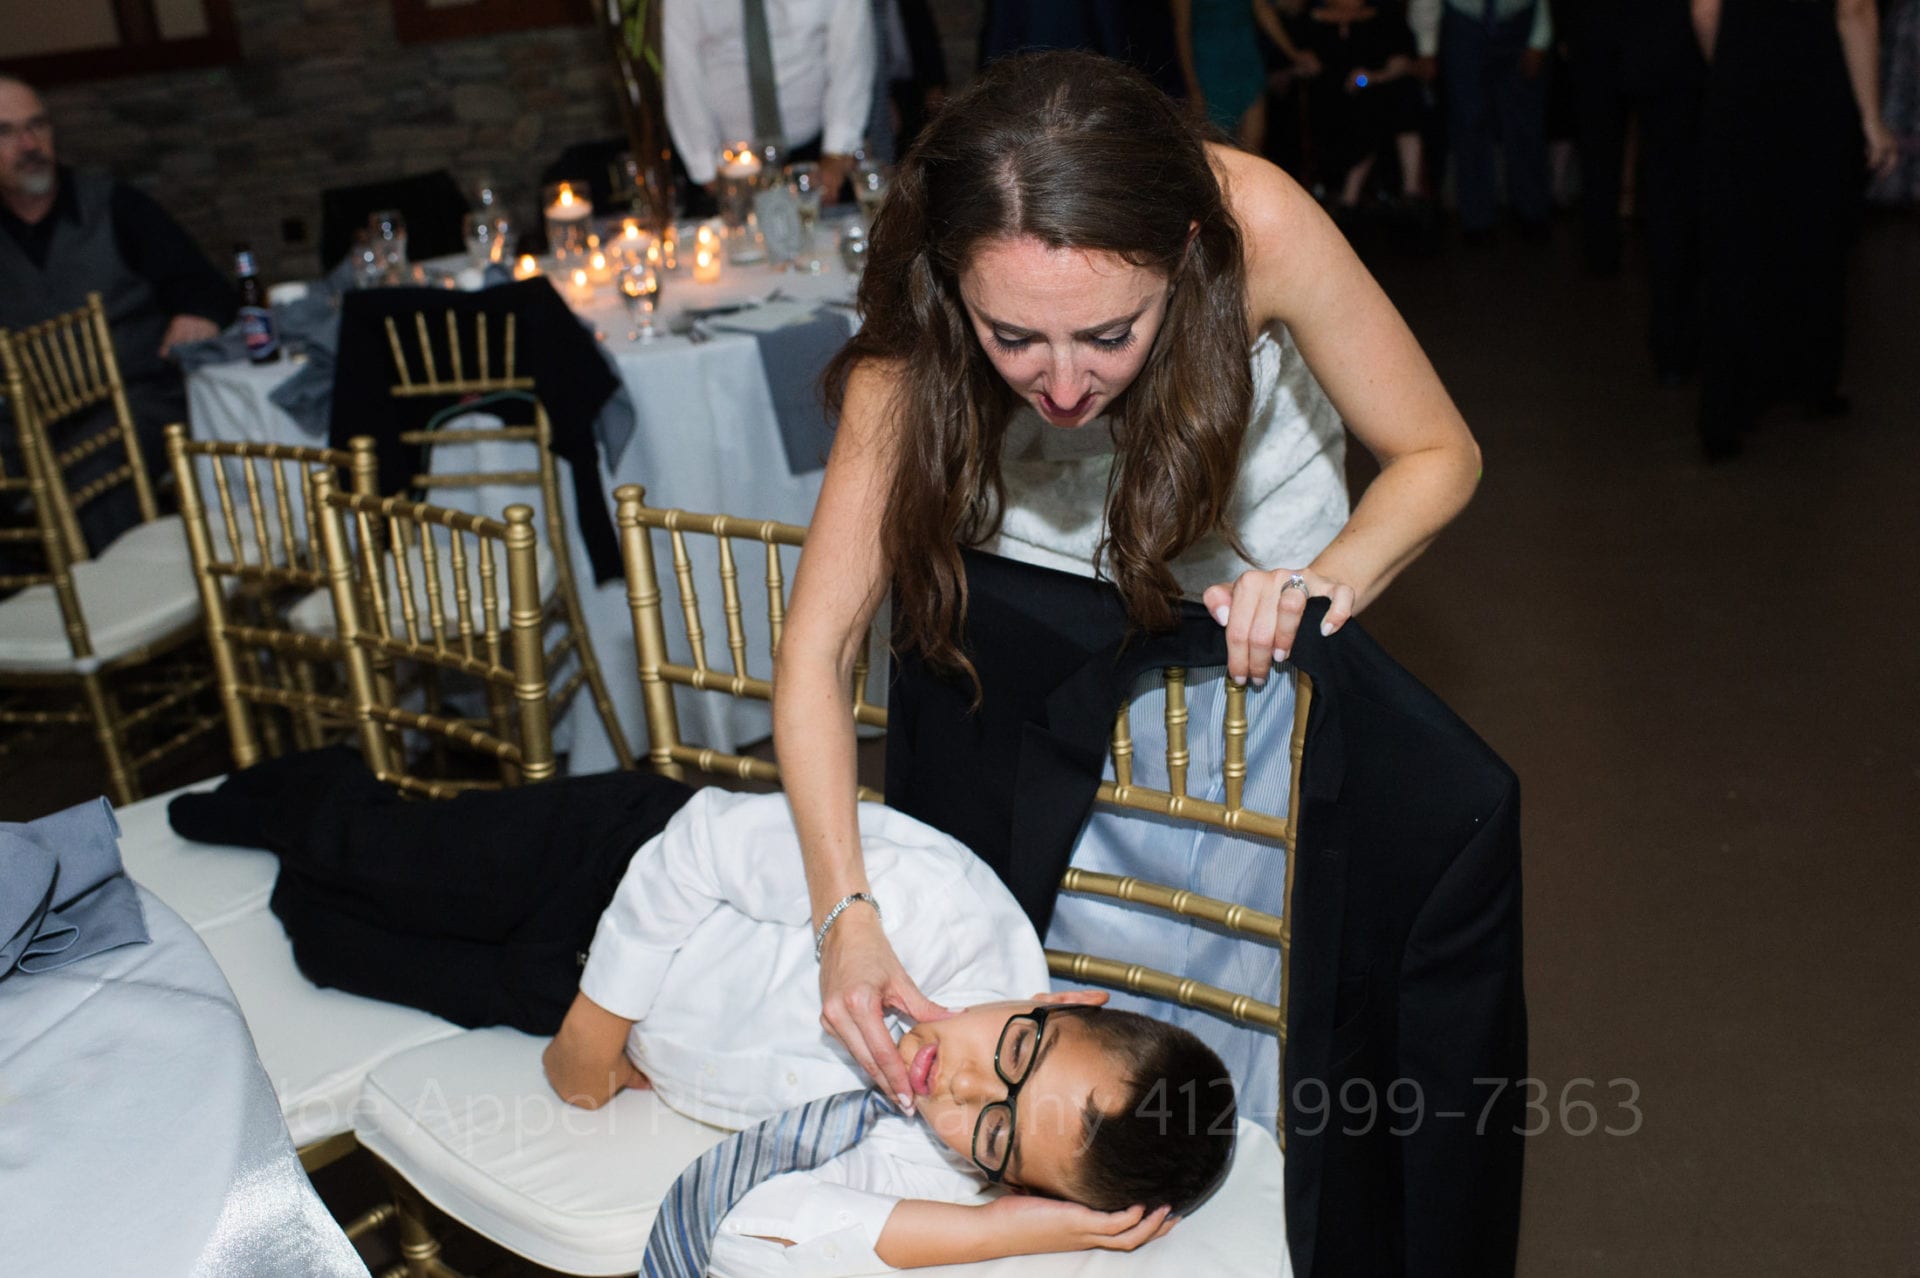 A bride reaches down to touch a child who is sleeping on several chairs that have been pushed together.